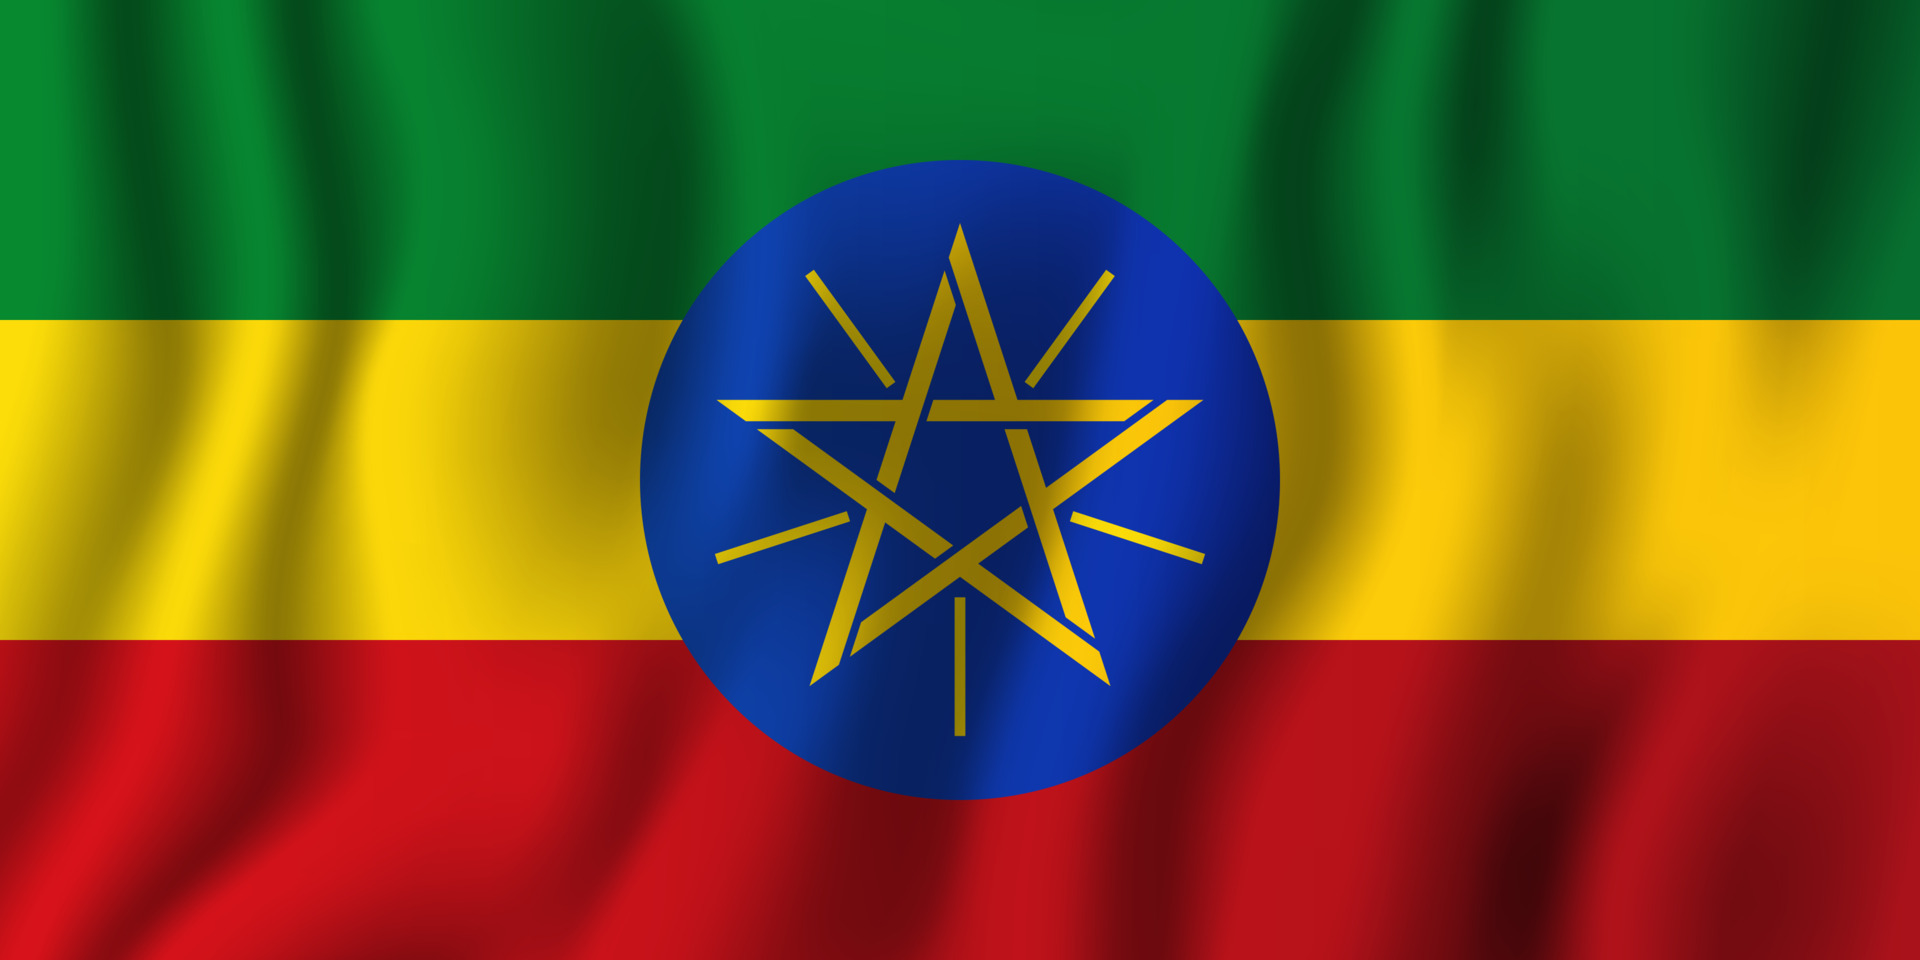 Ethiopia becomes Africa’s latest sovereign default.